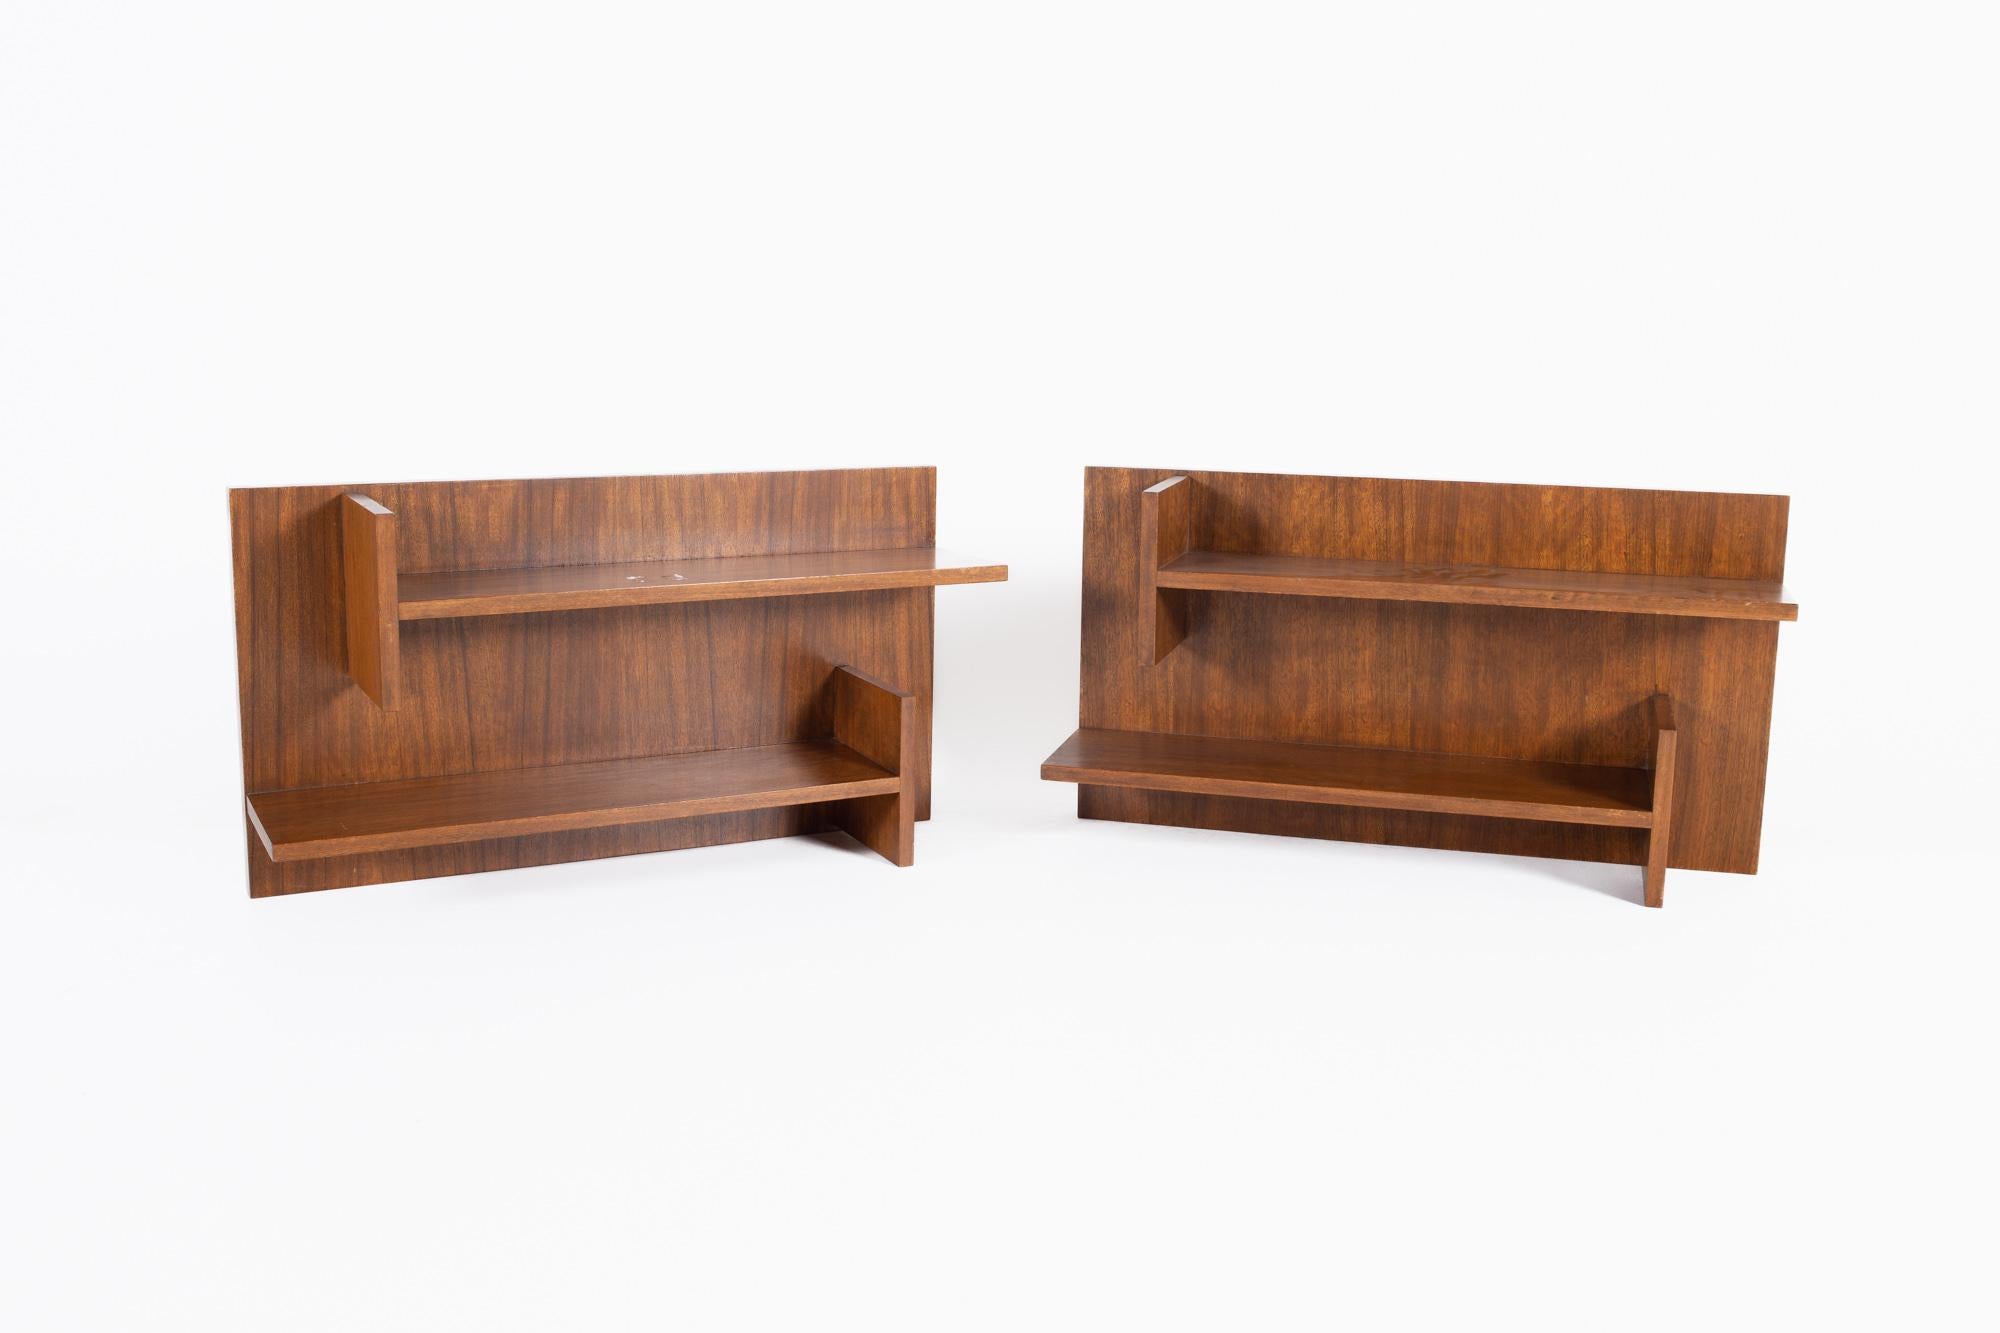 Mid century walnut floating shelves - A pair

Each shelf measures: 35 wide x 10 deep x 19 inches high

All pieces of furniture can be had in what we call restored vintage condition. That means the piece is restored upon purchase so it’s free of